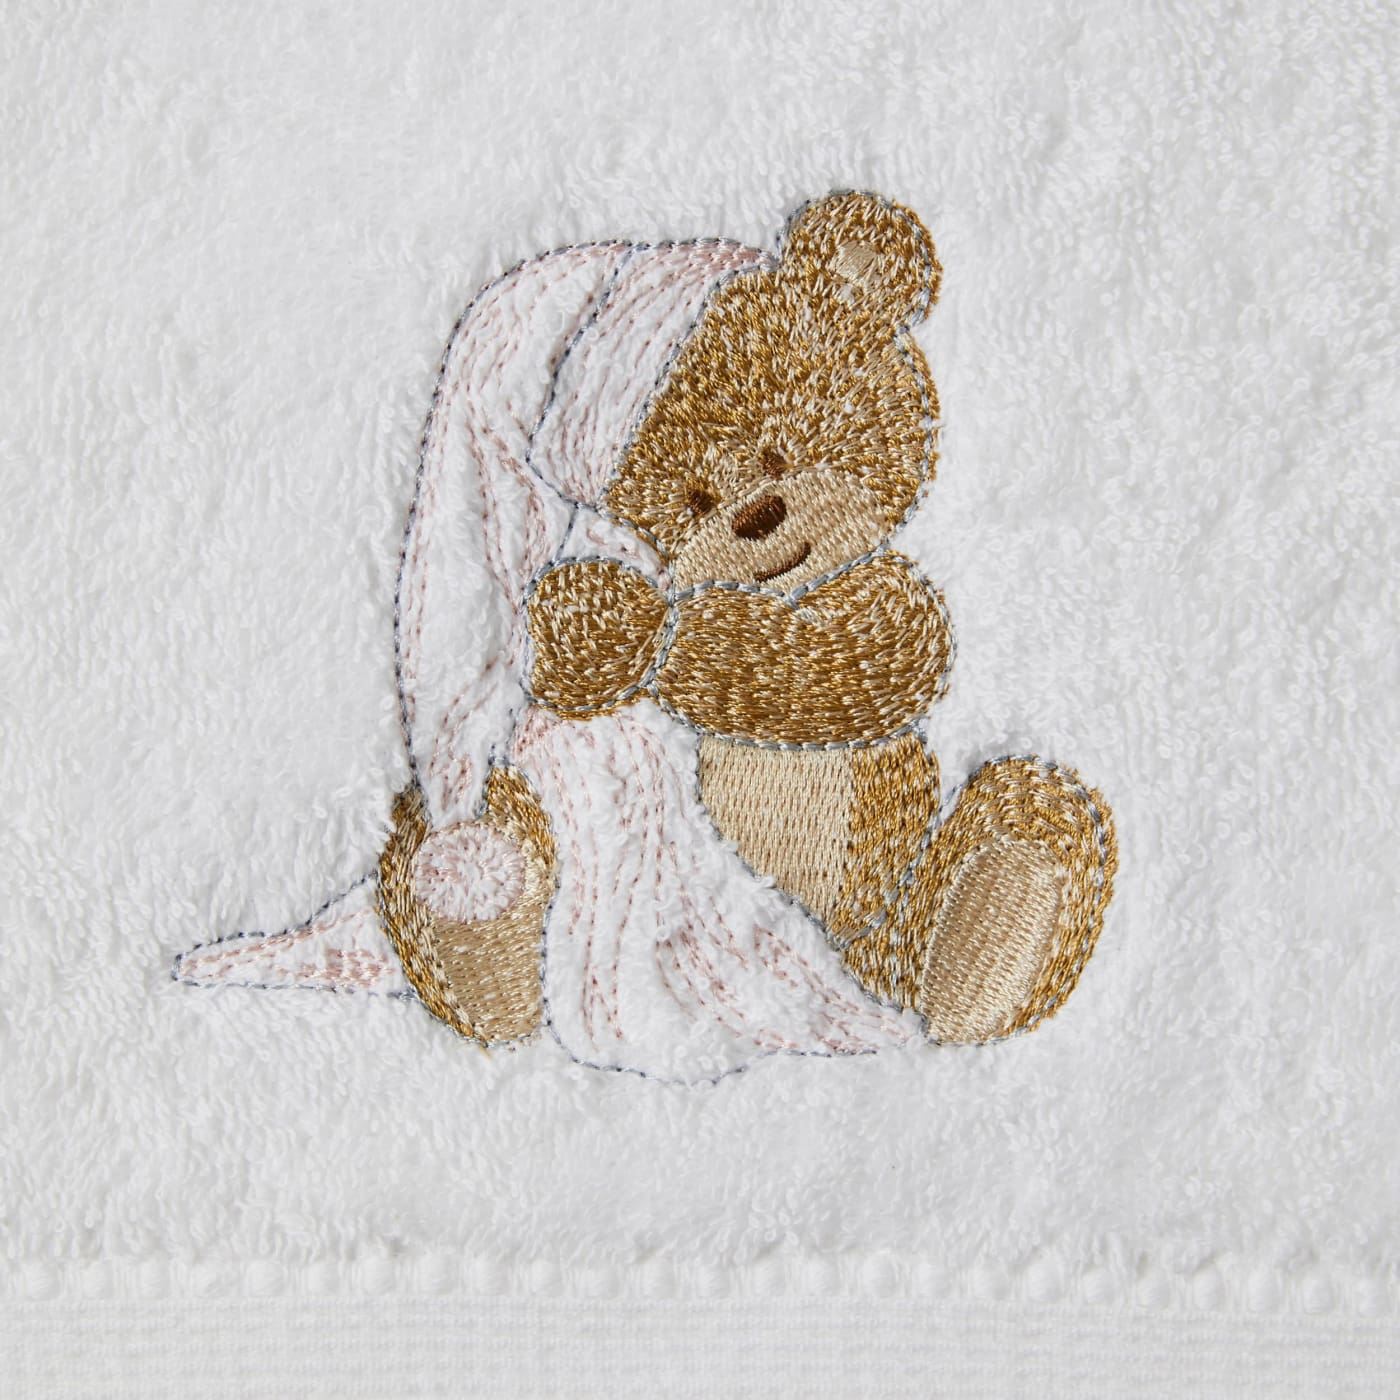 Jiggle & Giggle Towel & Face Washer Set in Organza Bag - Notting Hill Bear - Notting Hill Bear - BATHTIME & CHANGING - TOWELS/WASHERS